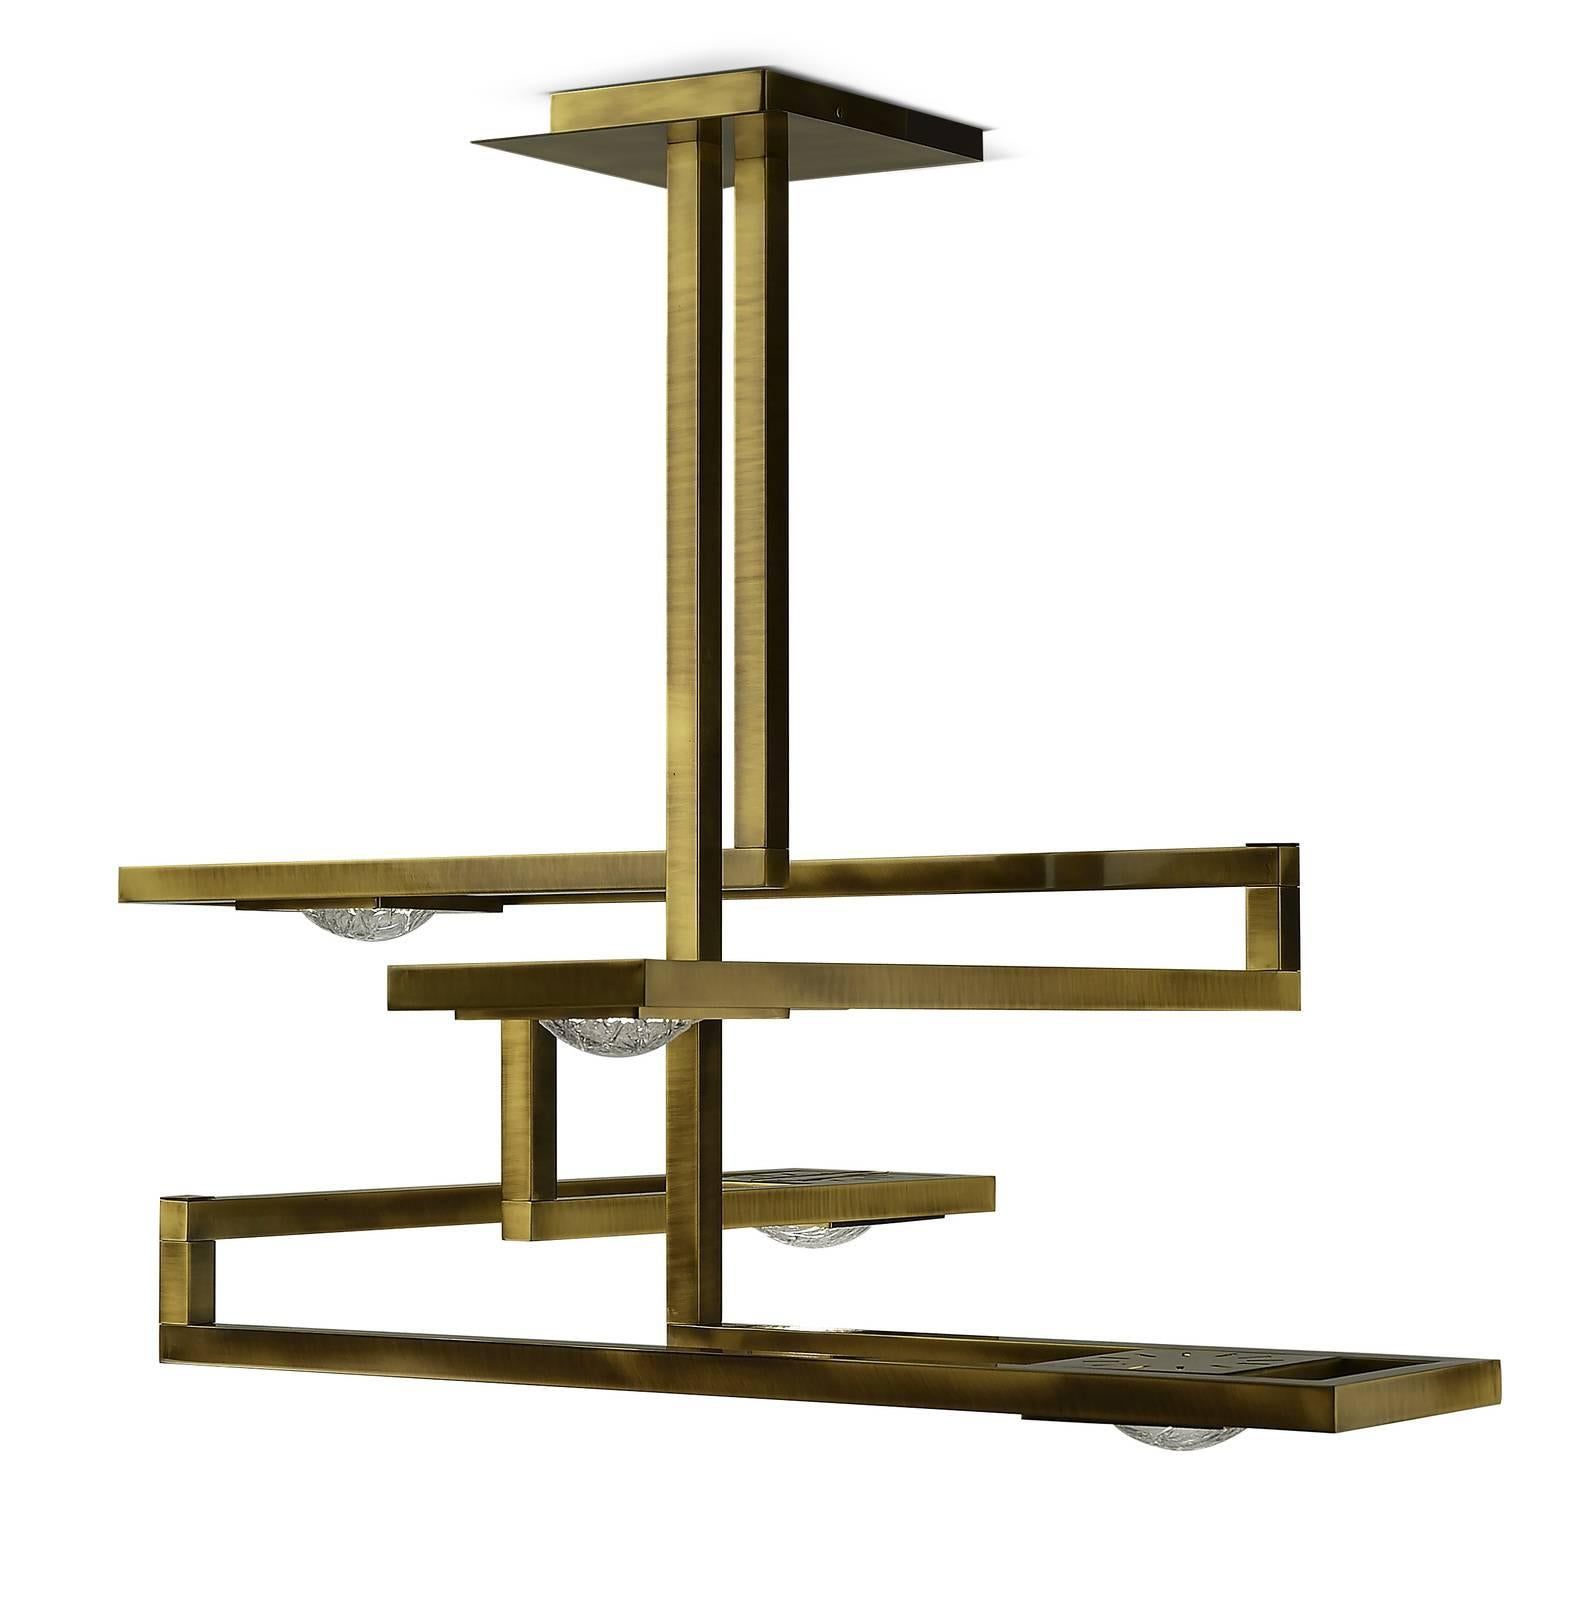 This exquisite lamp was entirely made of brass. It is attached to the ceiling through a square base, from which two vertical elements hang, creating a Minimalist structure with four arms that create a square Silhouette, hanging at different heights